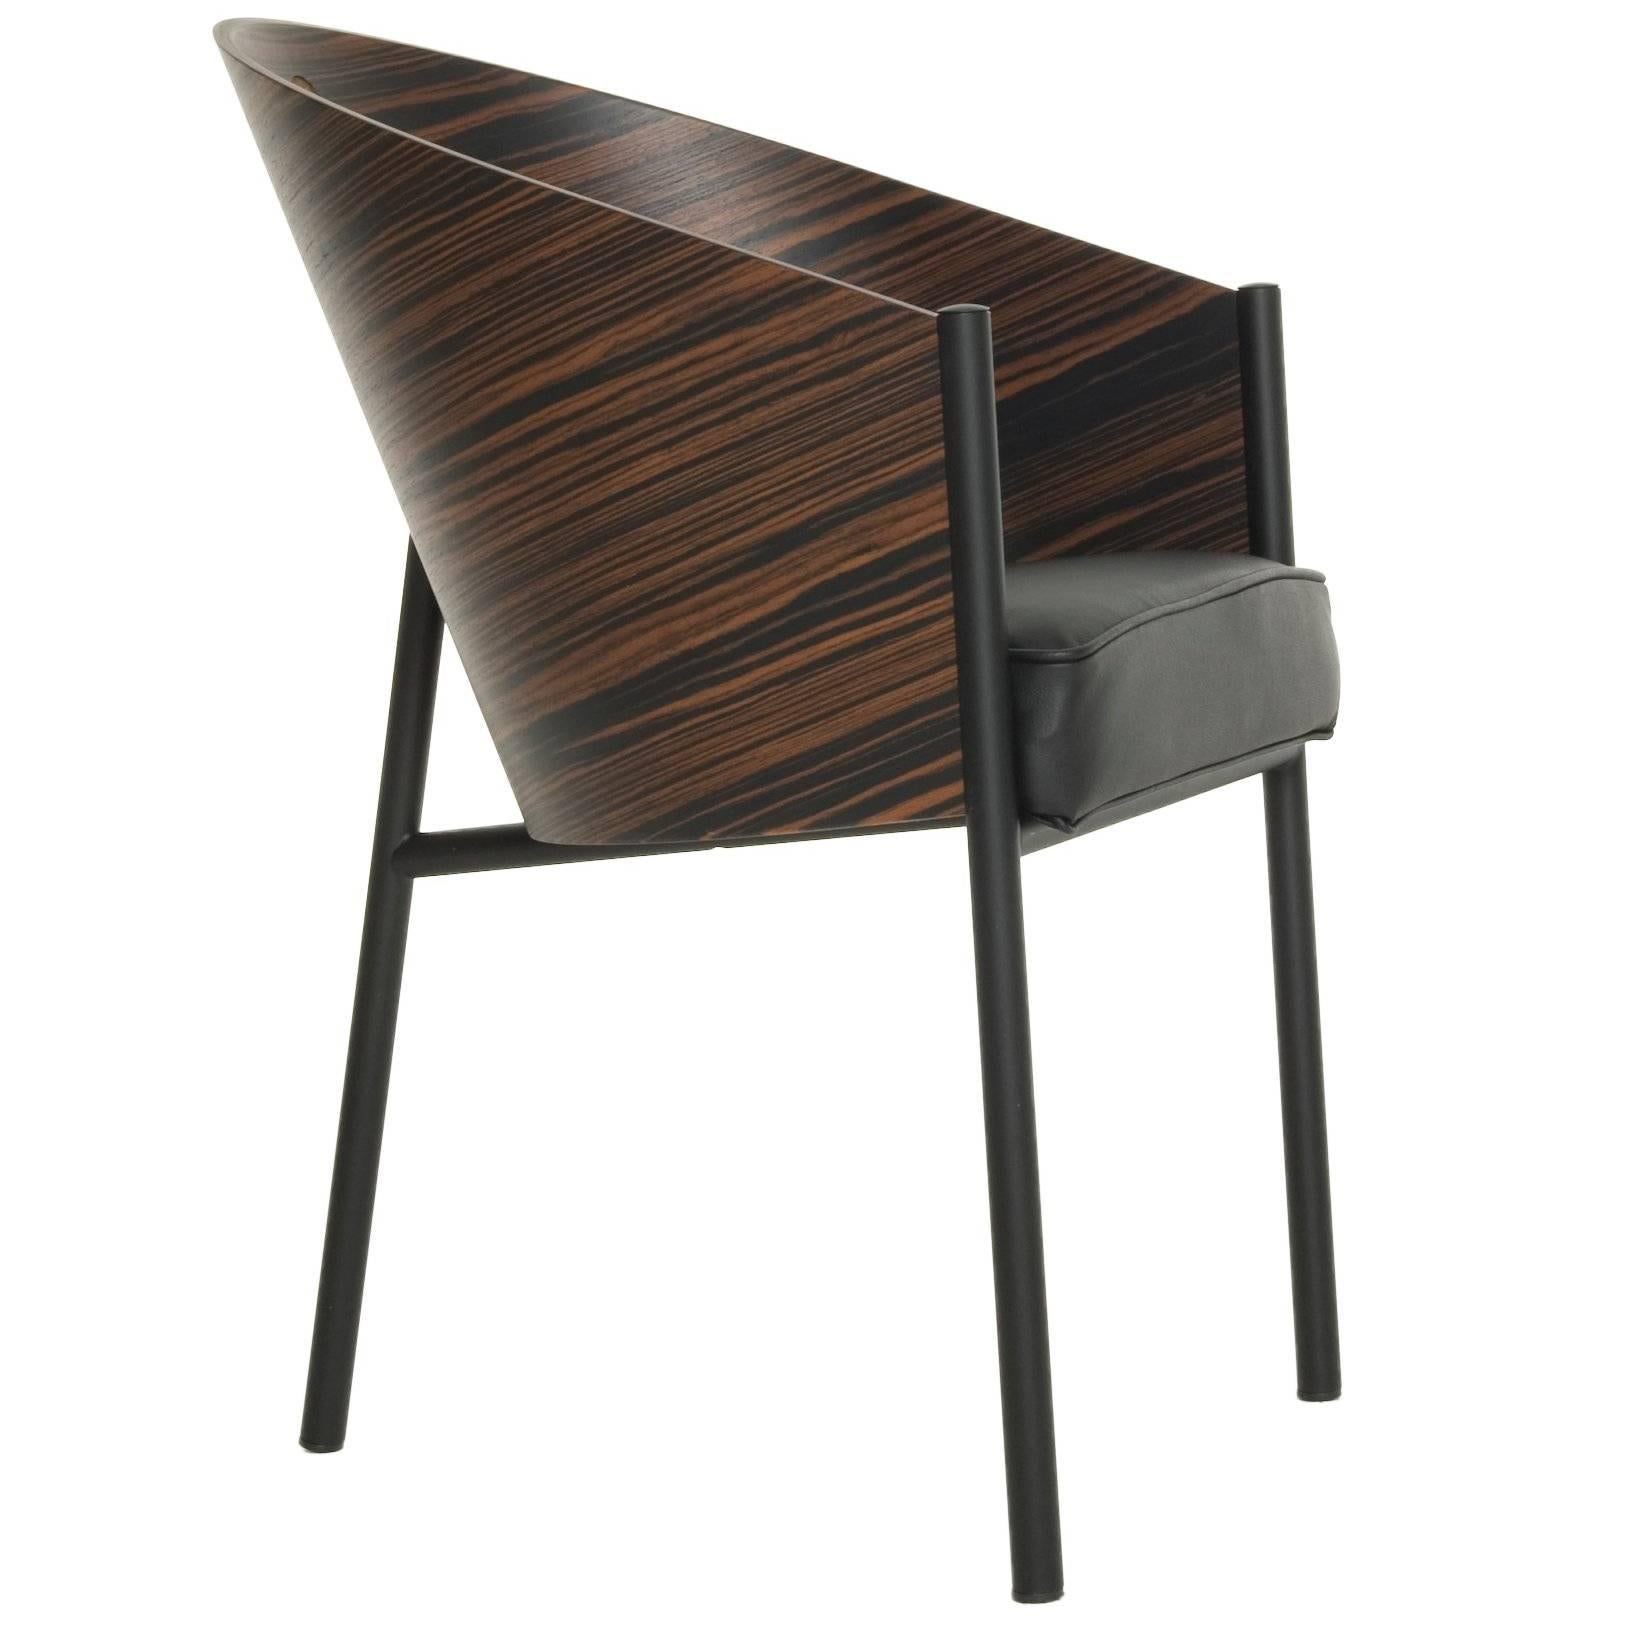 "Costes" Curved Striped Wenge or Bamboo Plywood Armchair by P. Starck for Driade